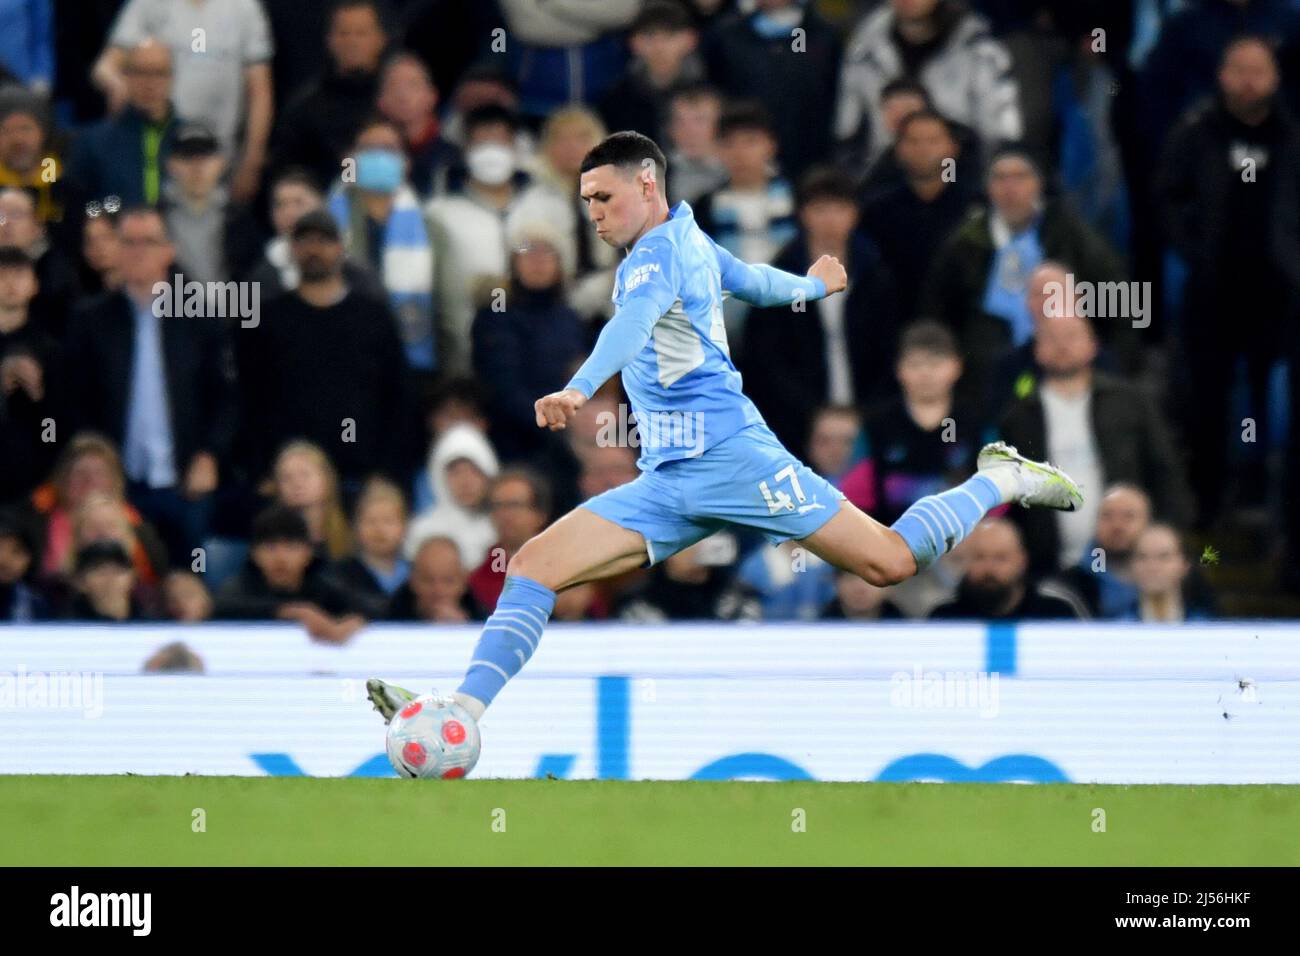 Manchester, UK, 20 April 2022,  Manchester City's Phil Foden scores his side's second goal of the game. Picture date: Thursday April 21, 2022. Photo credit should read:   Anthony Devlin/Alamy Live News/Alamy Live News Stock Photo